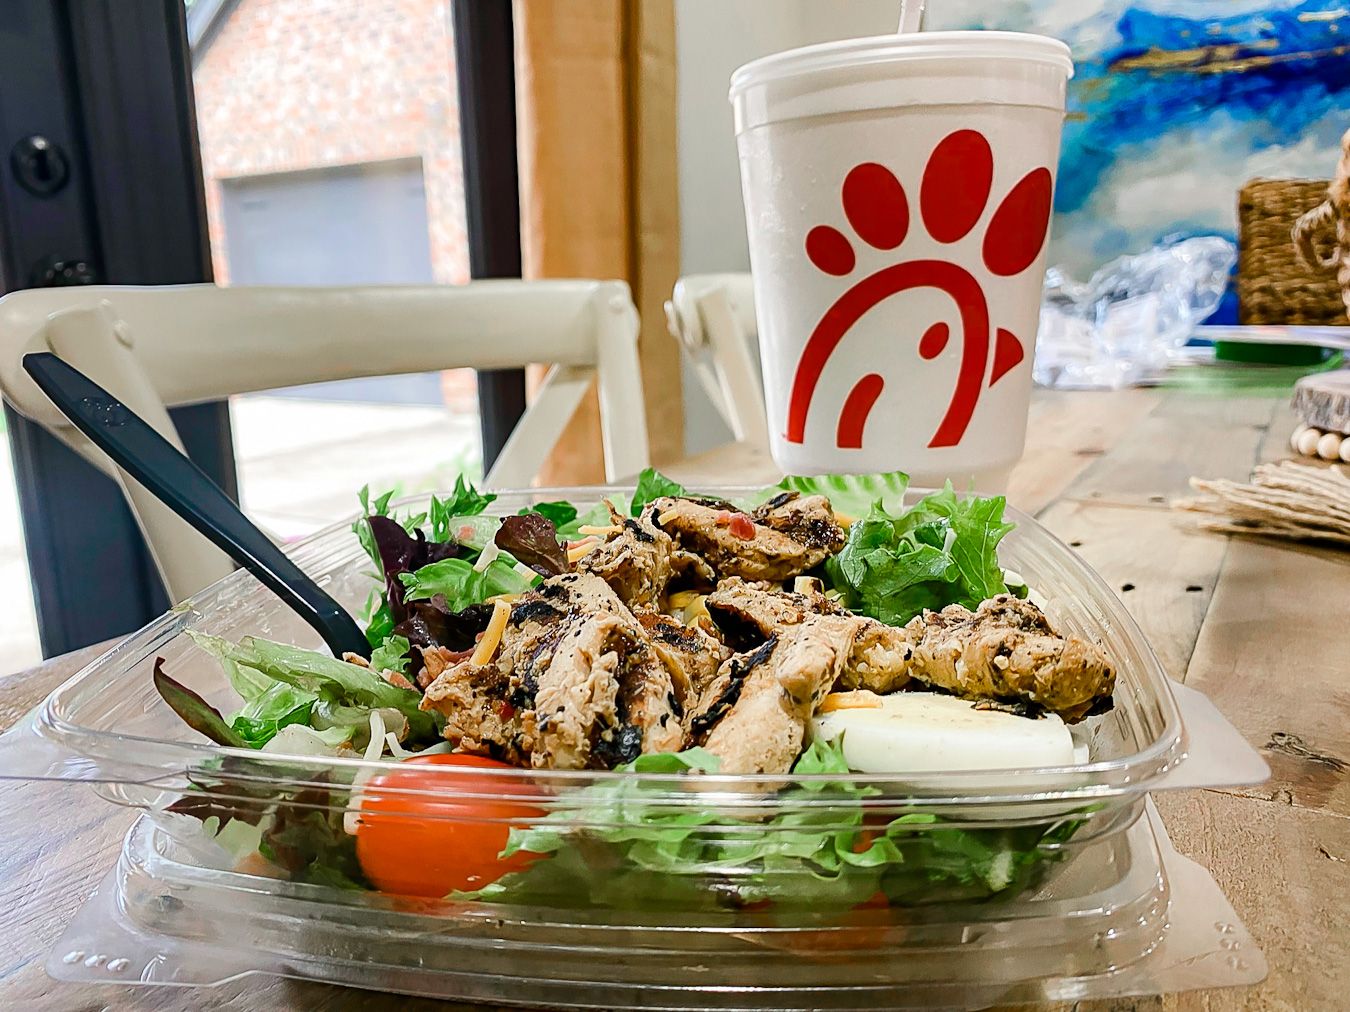 4 Healthy Chick-fil-A Low Carb Dinners by Alabama Food + Healthy Lifestyle blogger, My Life Well Loved.